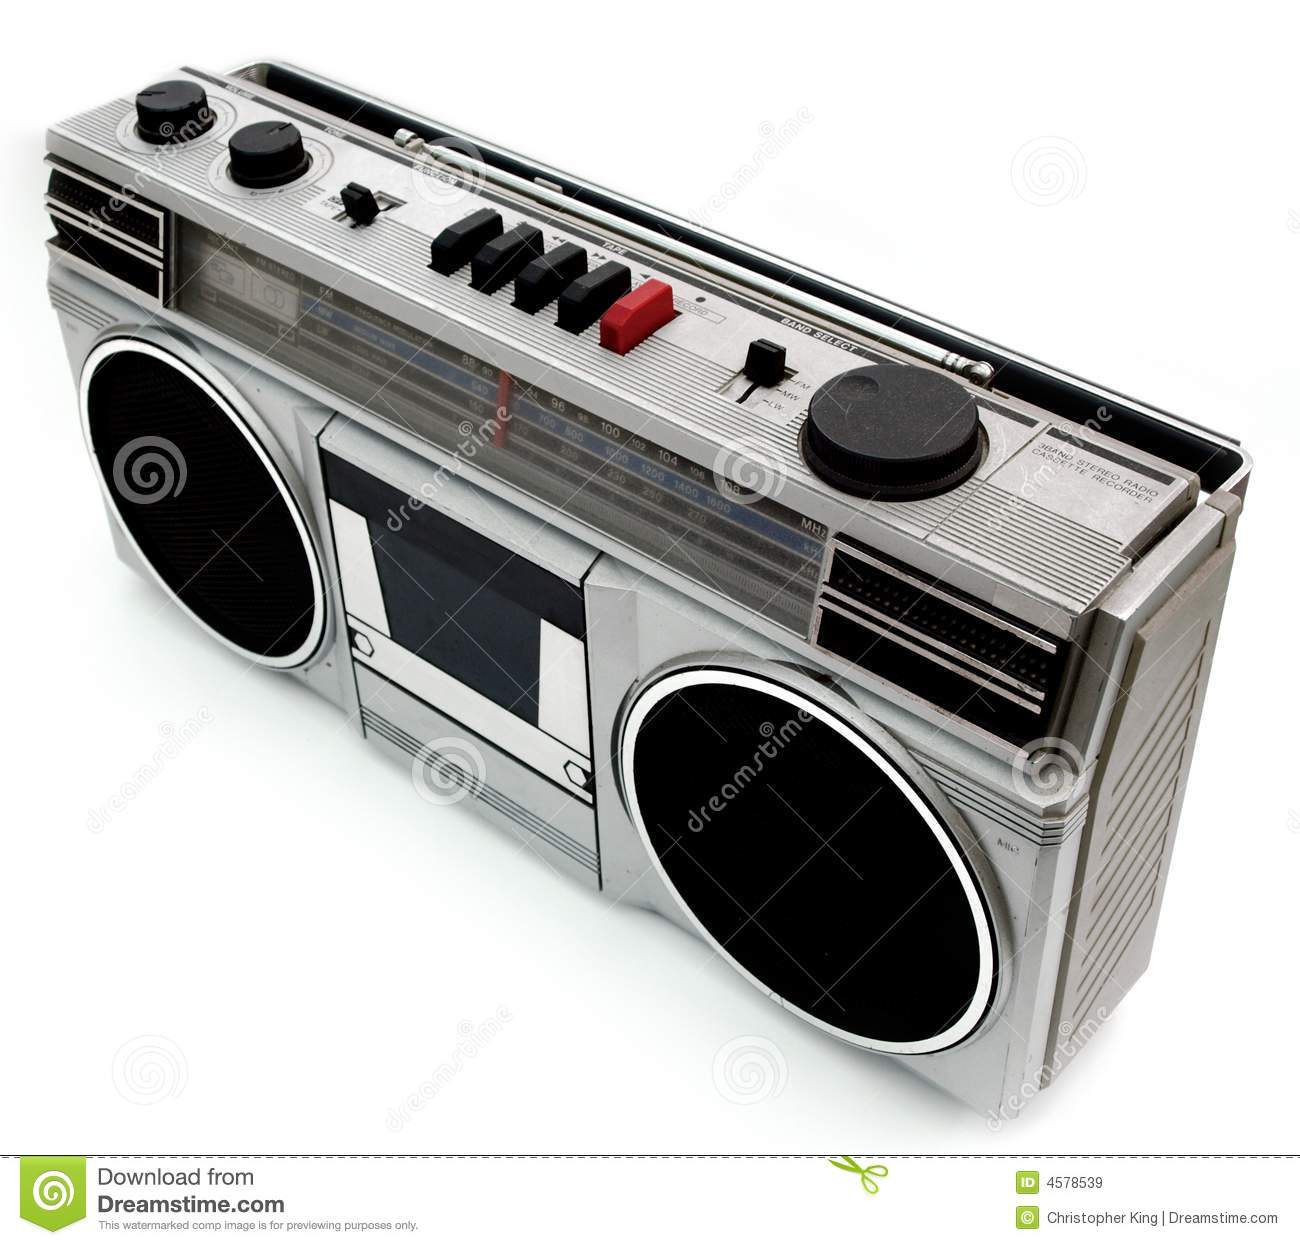 1980s Style Portable Cassette Player Royalty Free Stock Images   Image